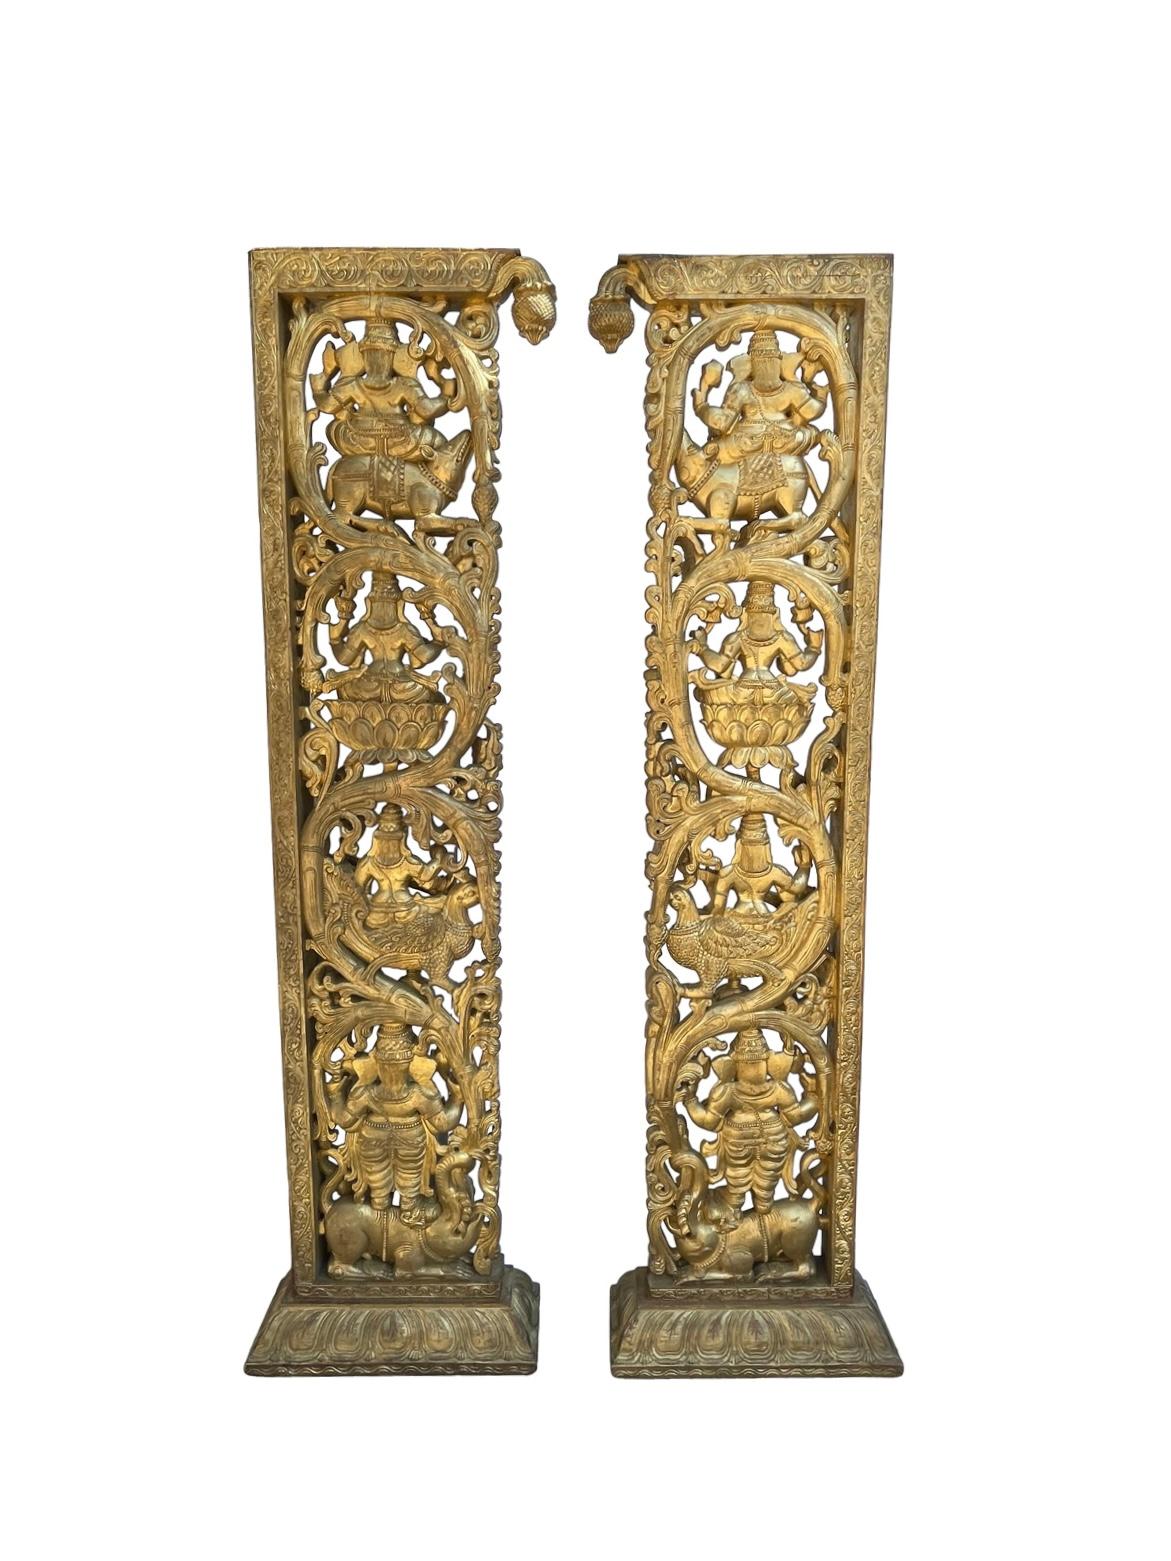 Exquisite pair of hand carved Ganesha gilded framed doorway or room dividers these are finished front and back with stunning detail they also stand on their own but recommend securing any questions please feel free to reach out.